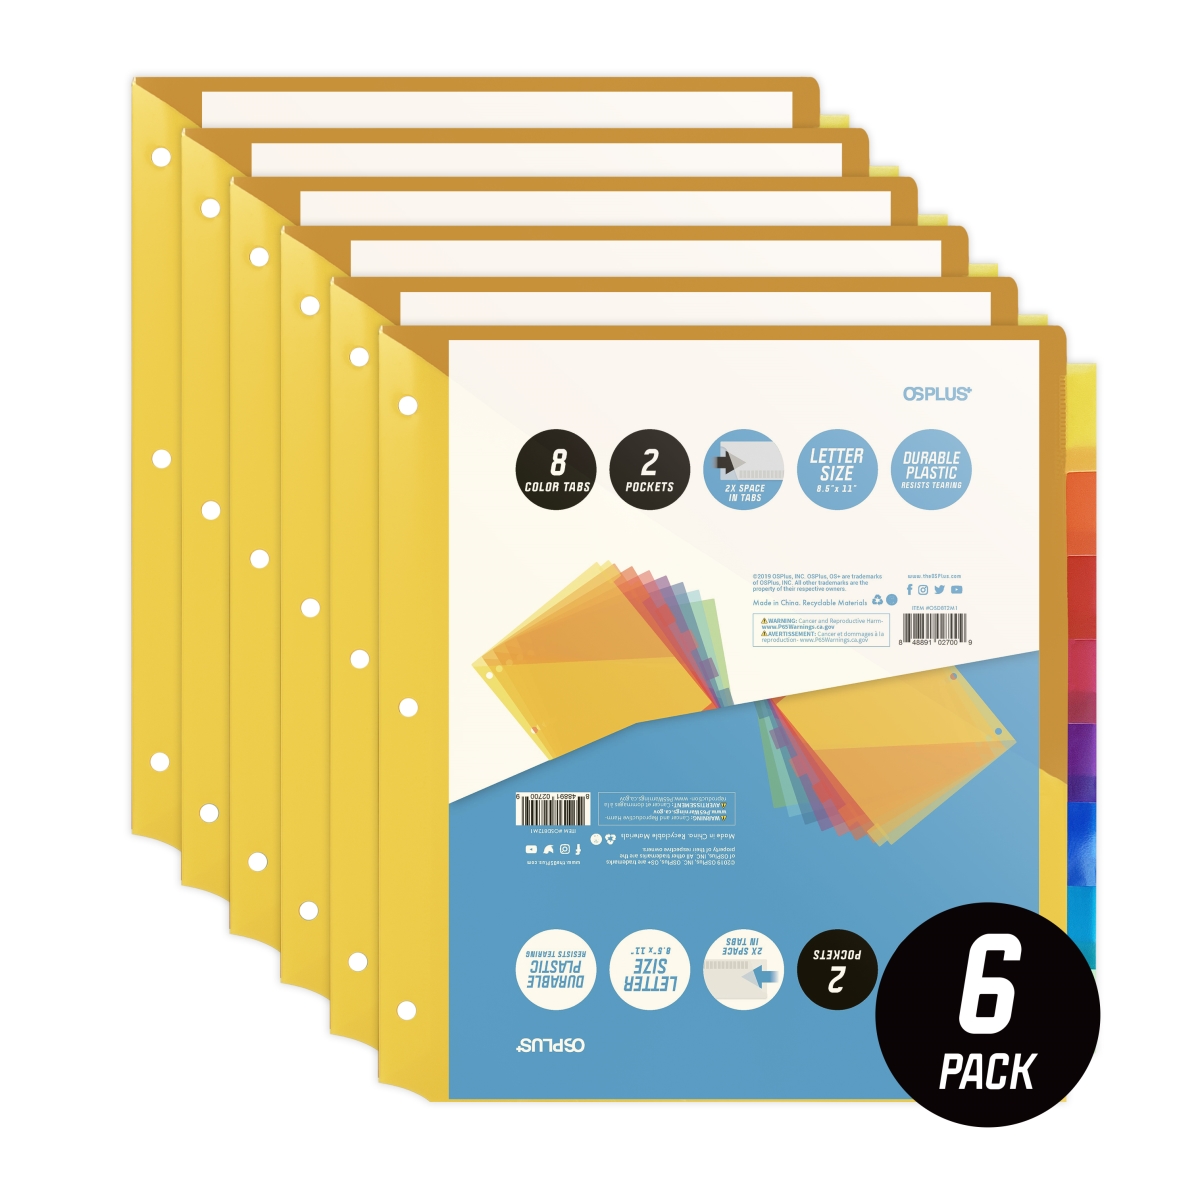 Osd8t2m6 8-tab Plastic Binder Dividers With 2 Pockets & Insertable Big Tabs - Set Of 6